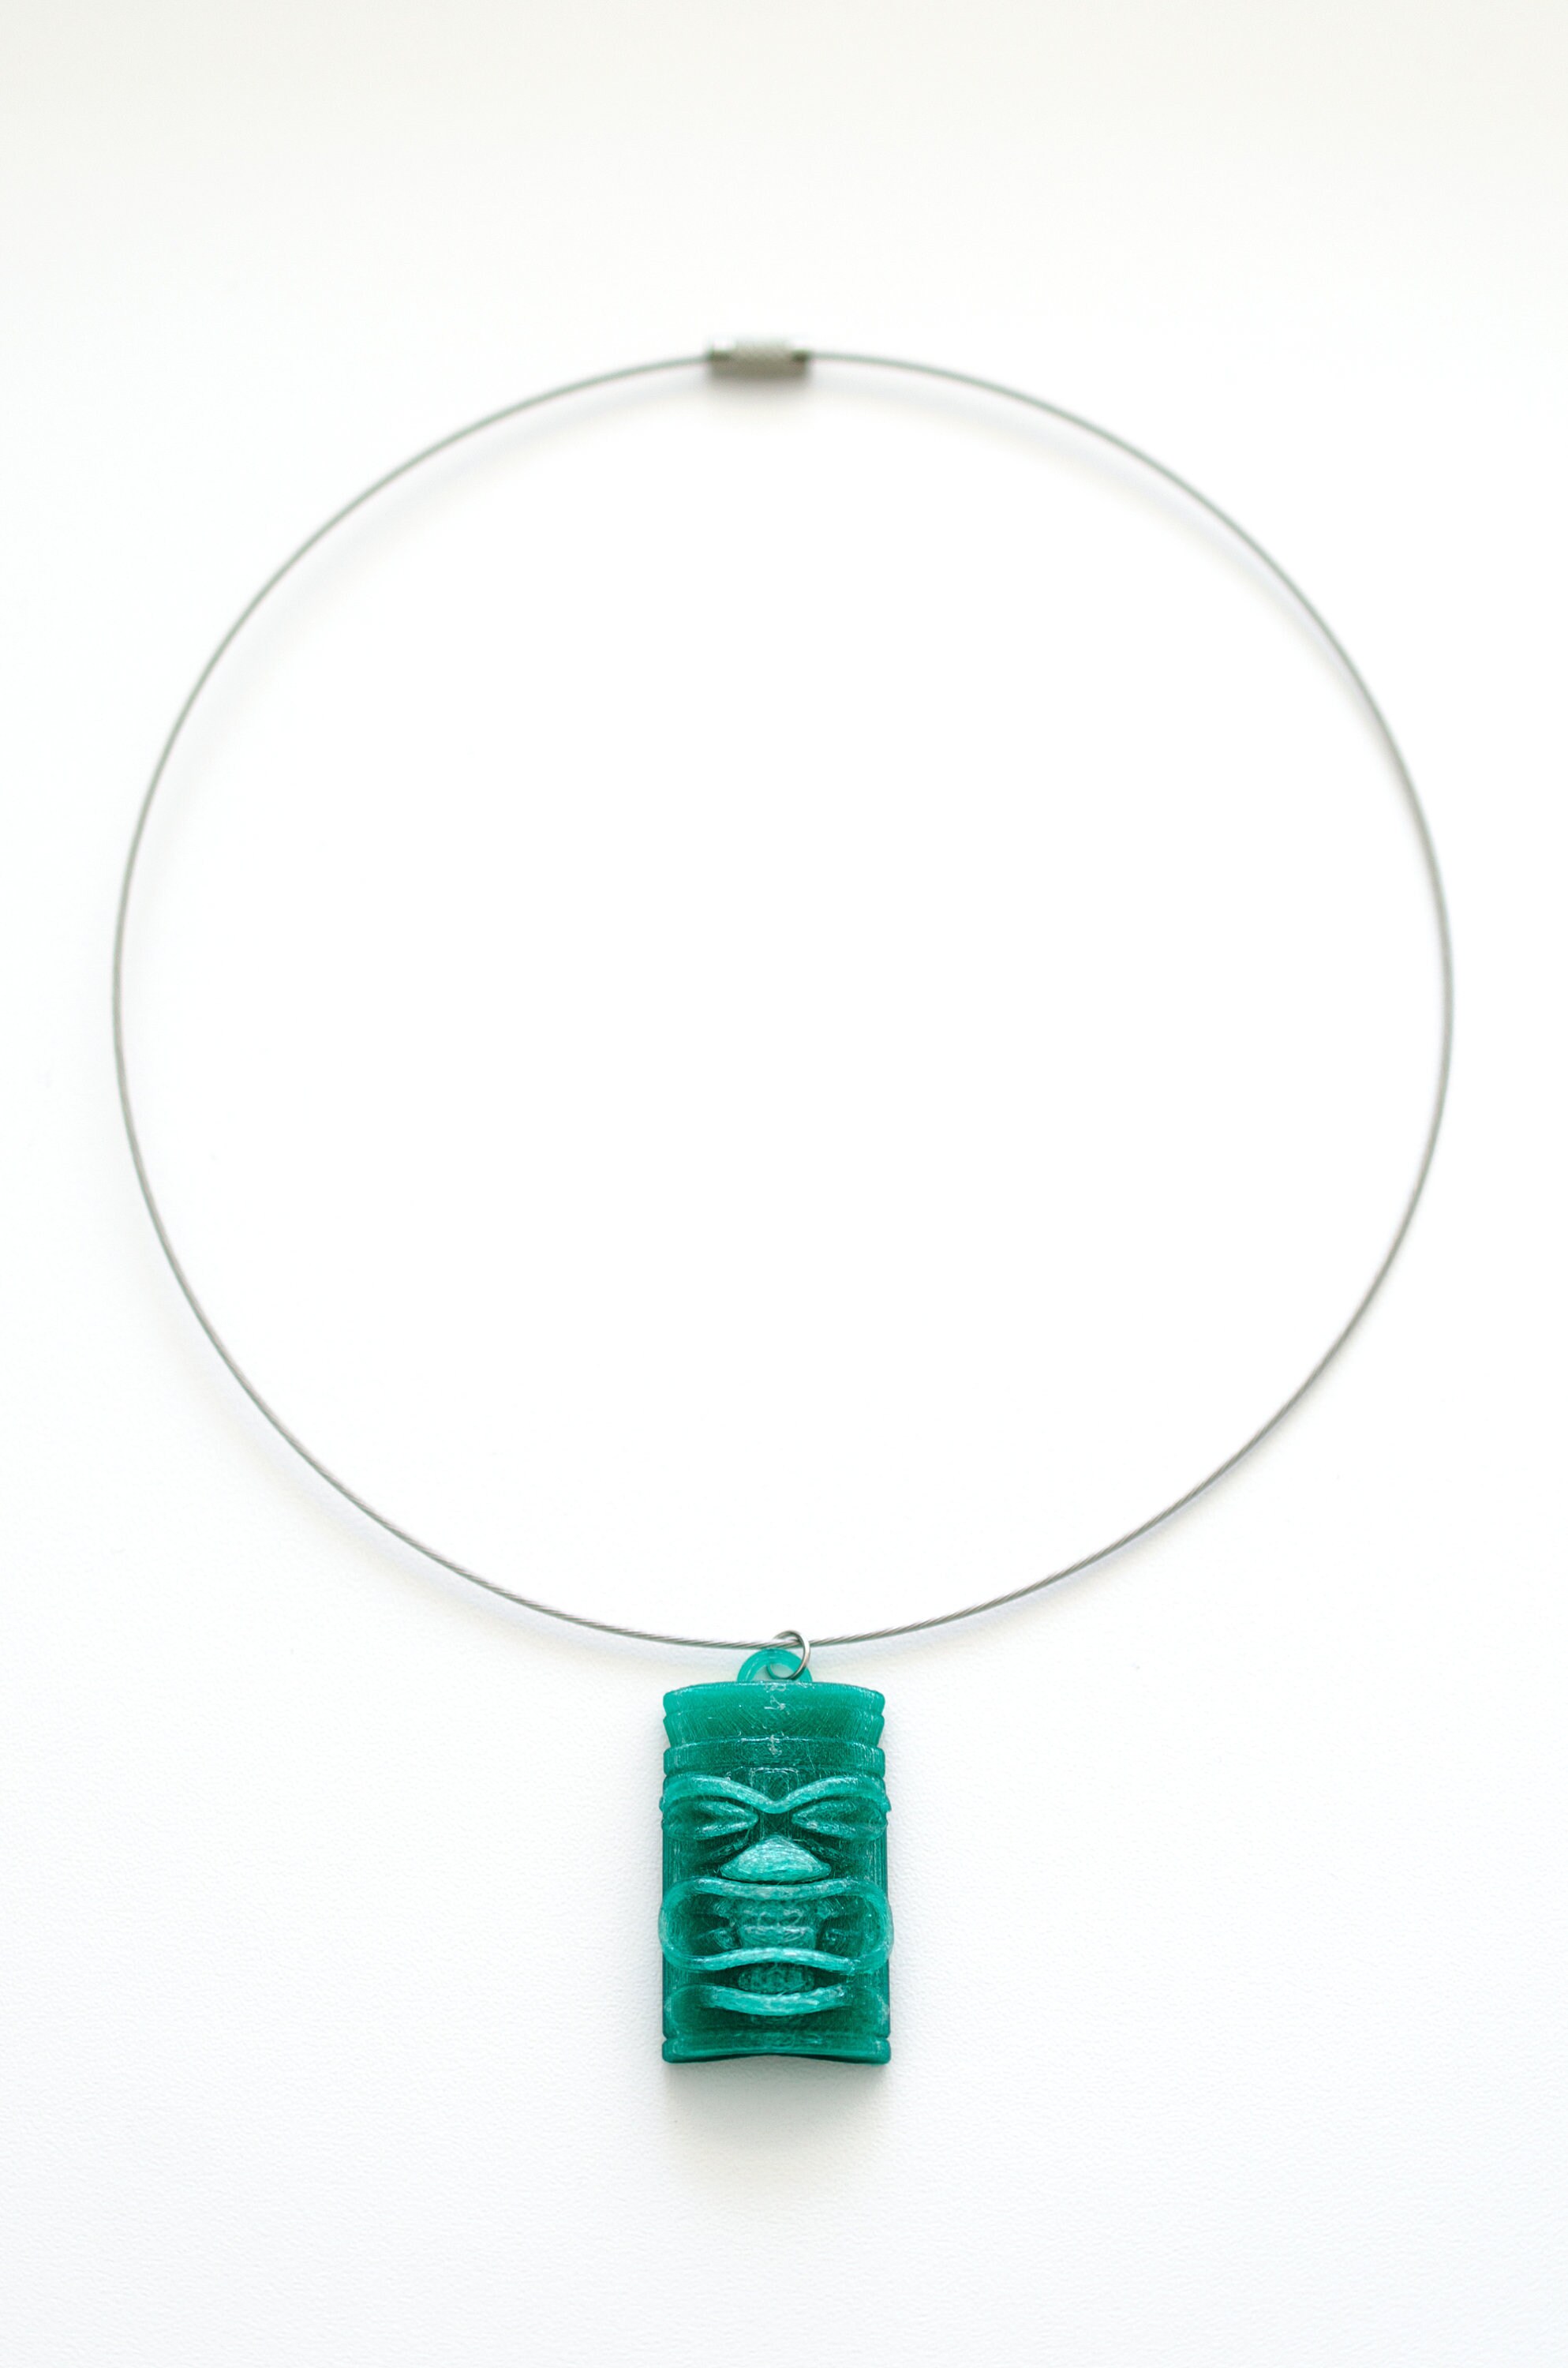 Tiki Polynesian and Hawaiian Vintage Style Pendant, 3d Printed Using Eco  Resin, Recycled Nylon With a Metallic Chain, Gift for Traveler -  New  Zealand